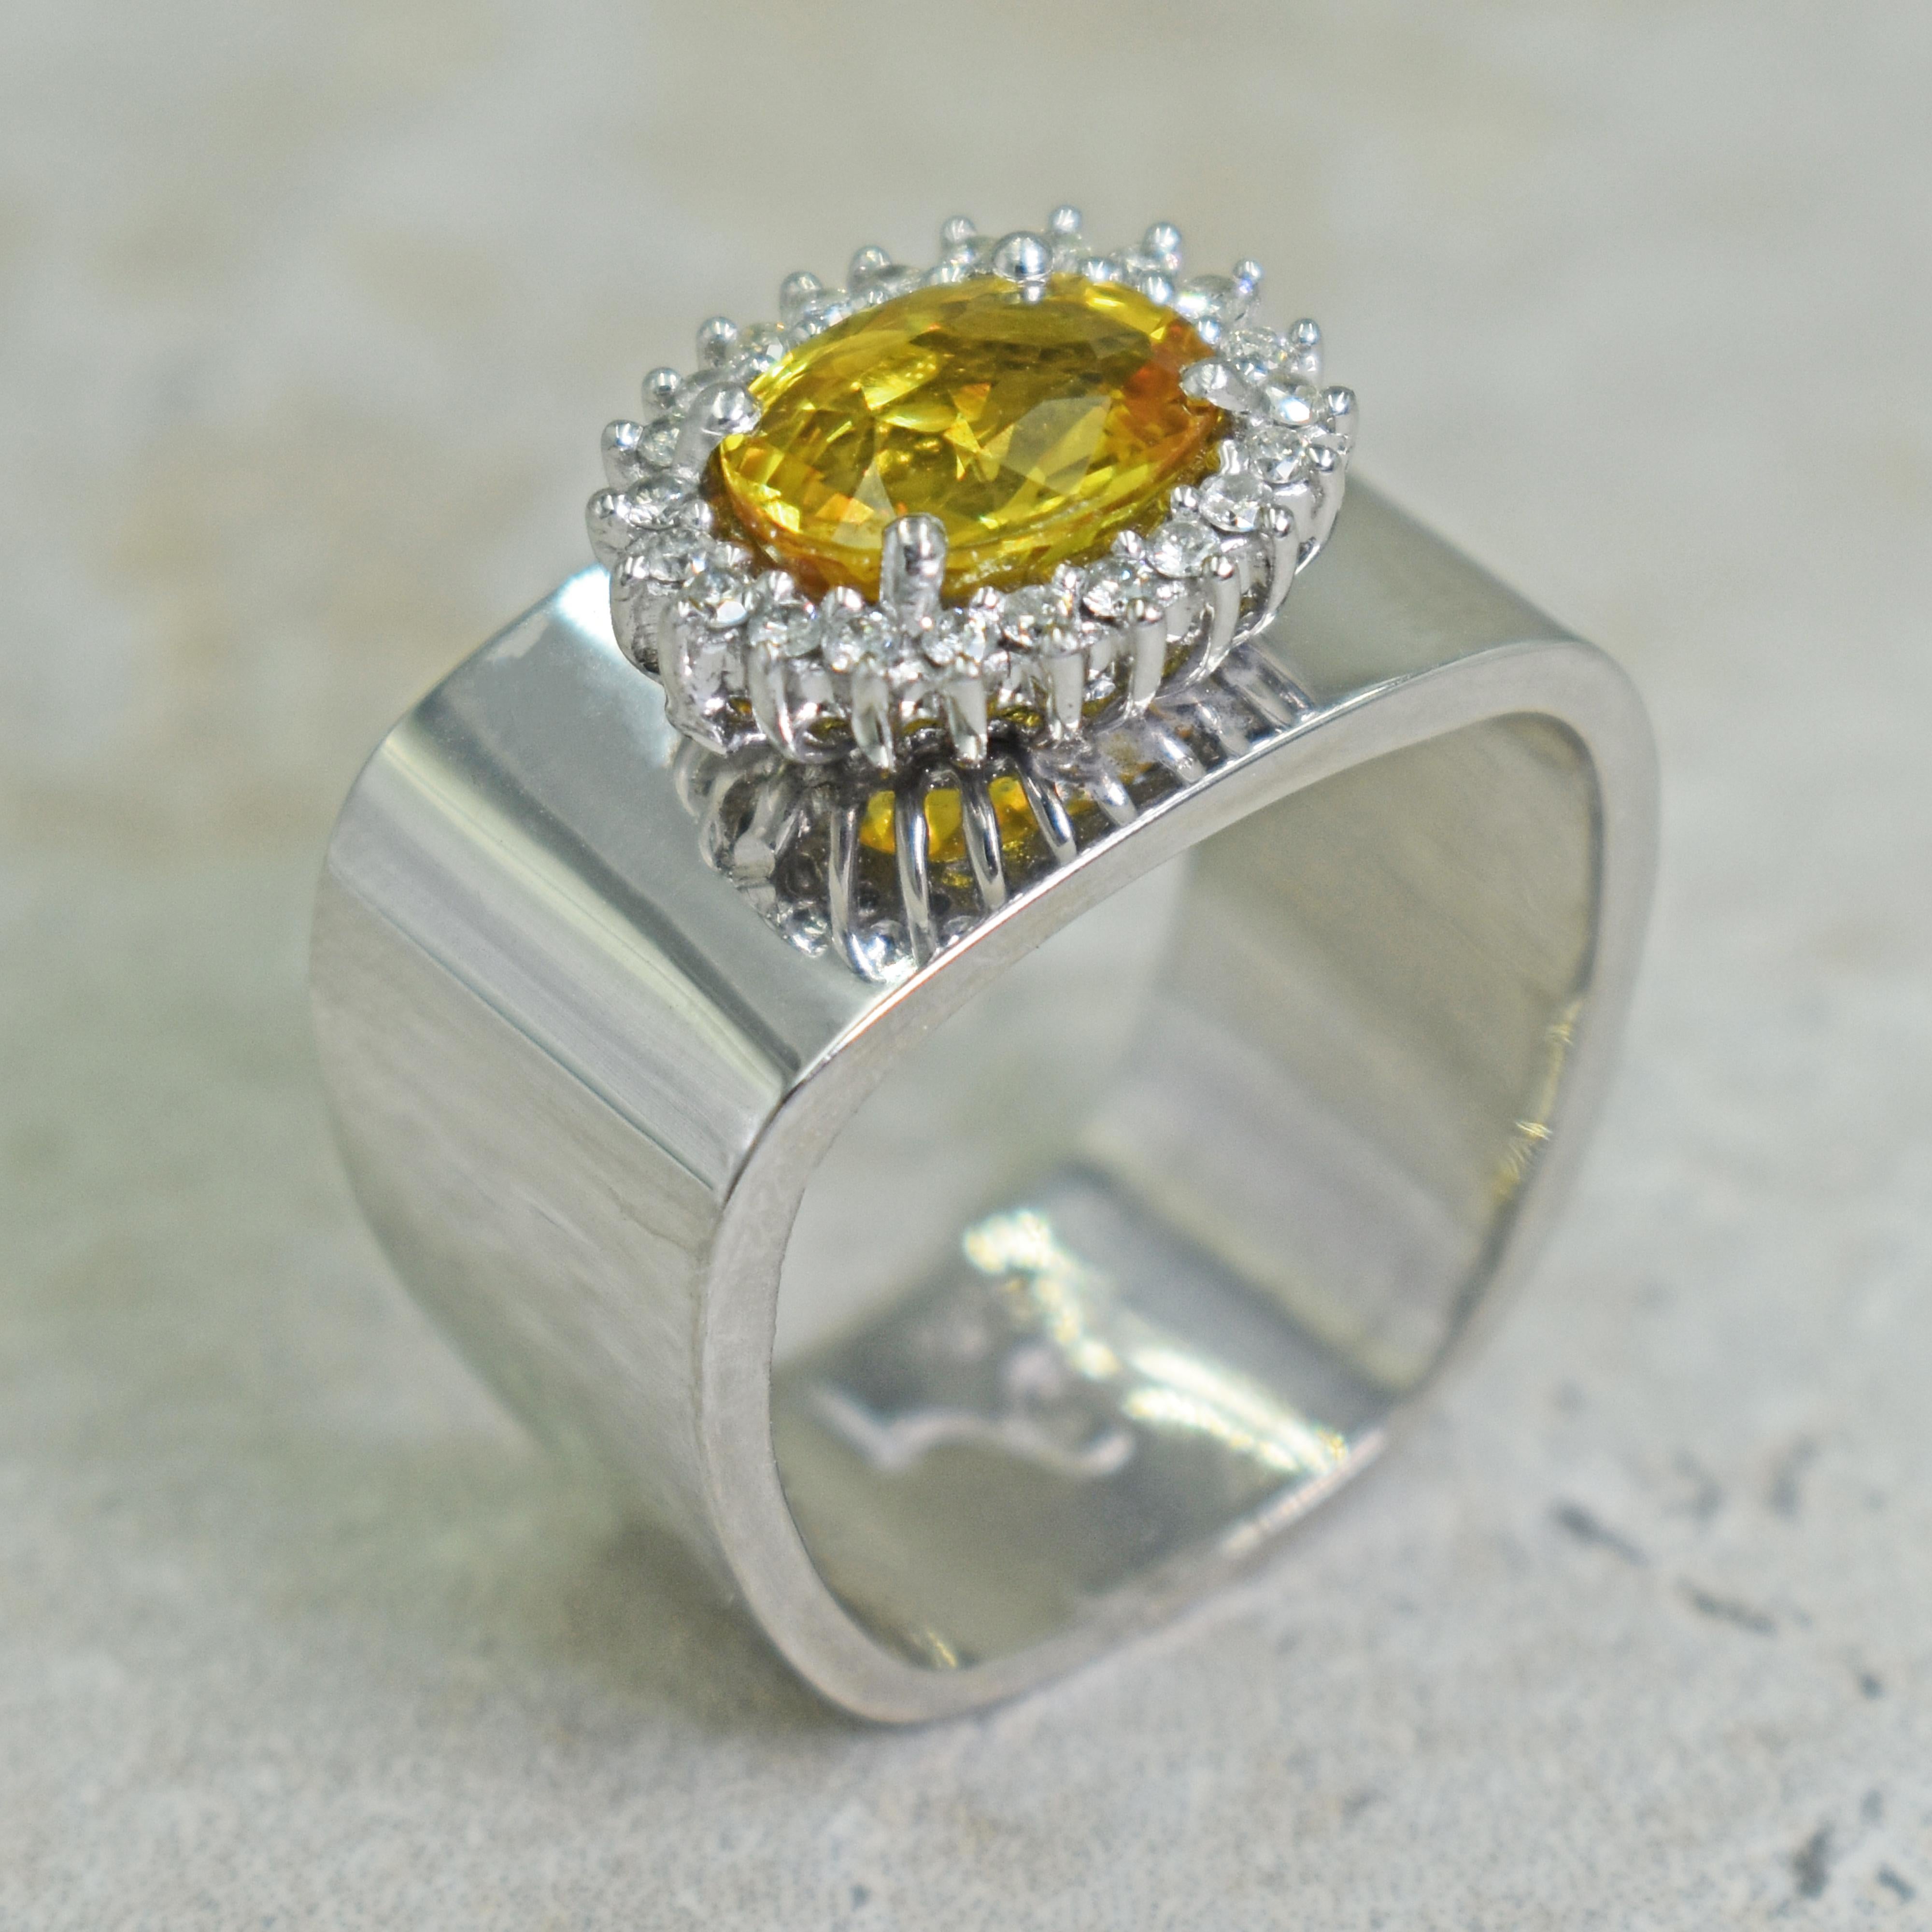 2.43 Carat Yellow Sapphire Diamond Halo 14 Karat White Gold Cocktail Ring In New Condition For Sale In Naples, FL